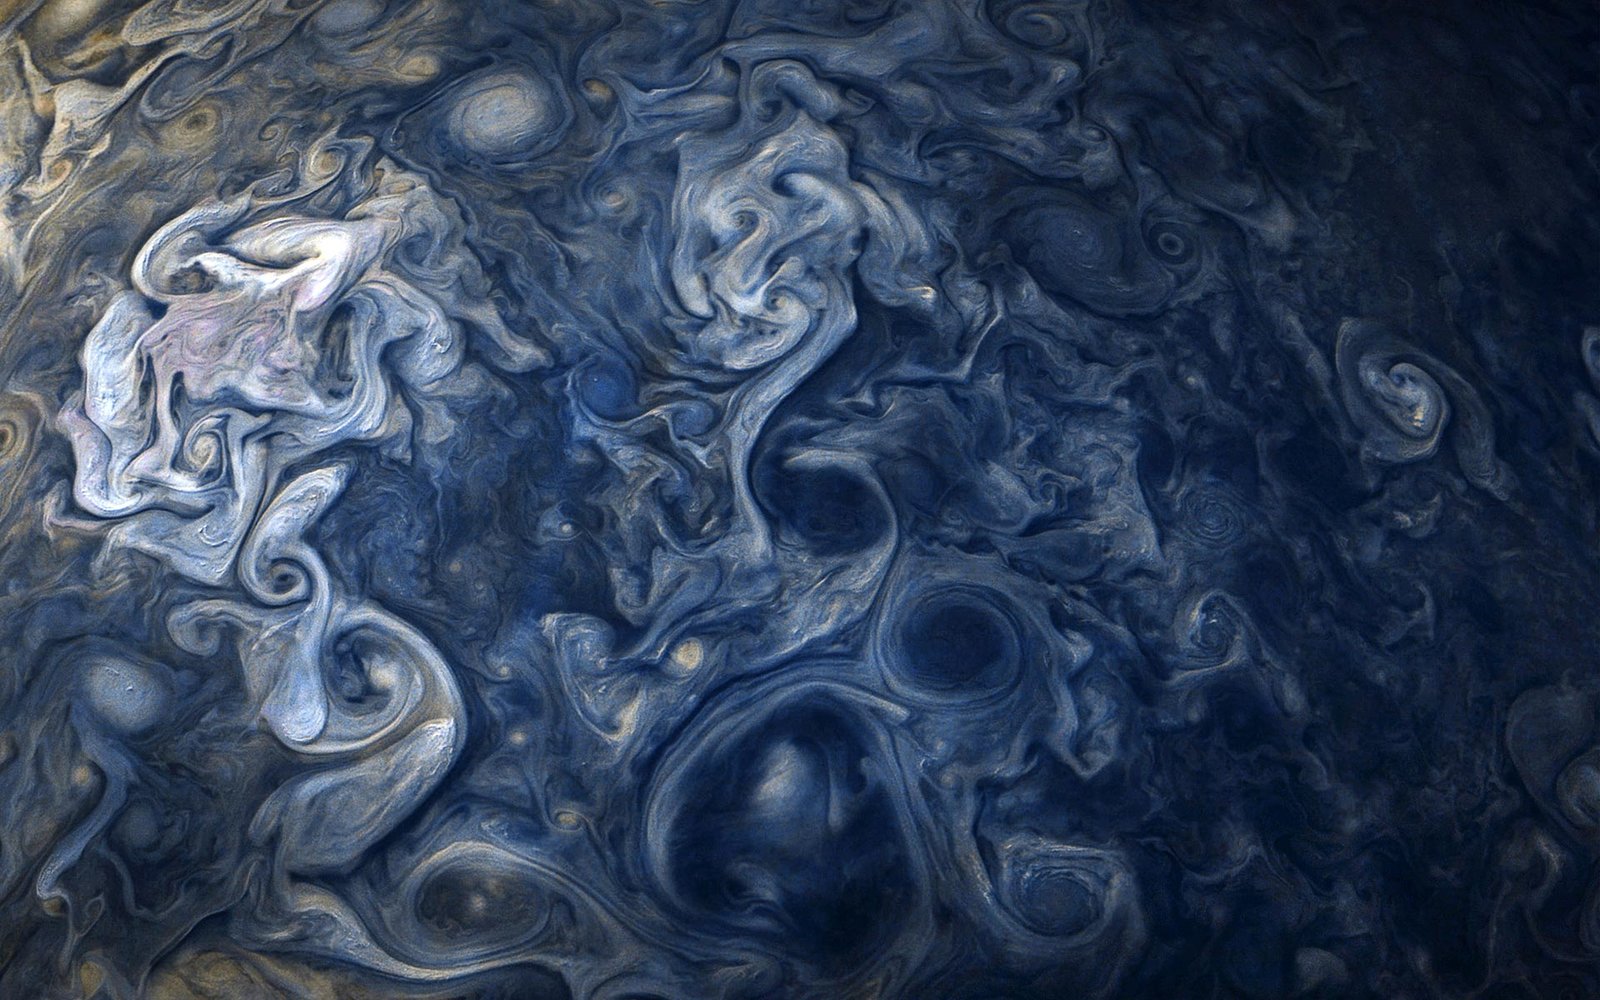 Jupiter’s Colossal Cyclones Driven by Earth-Like Atmospheric Processes